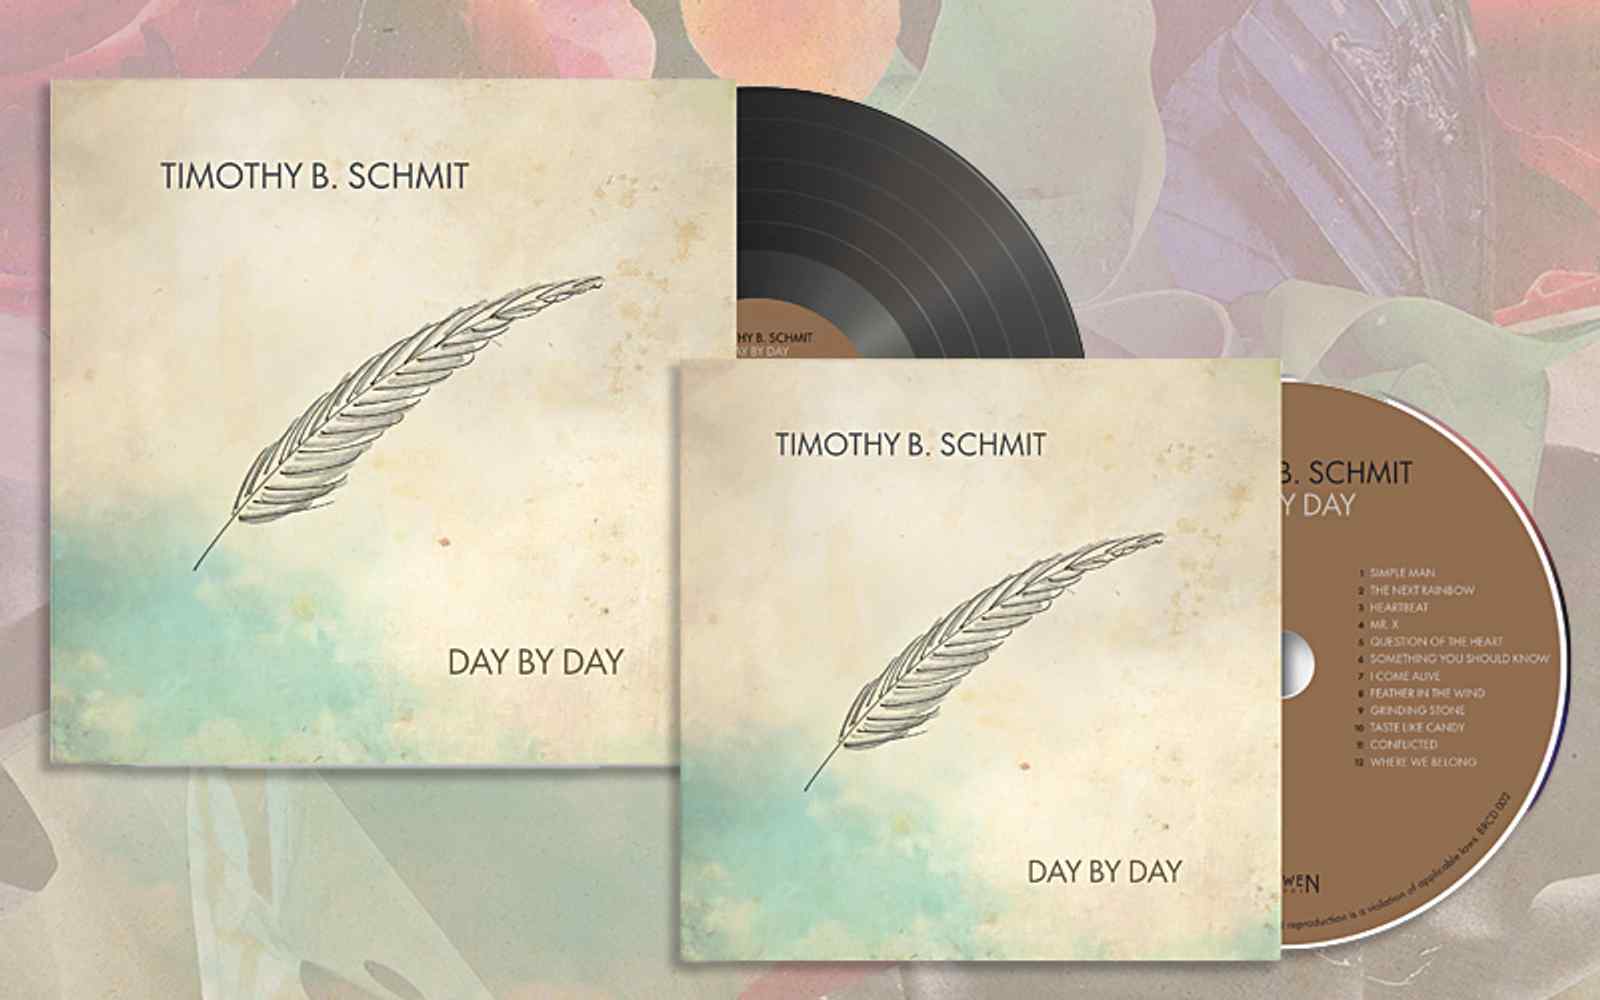 Timothy B. Schmit - 'Day By Day' - Available for Pre-Order Now!